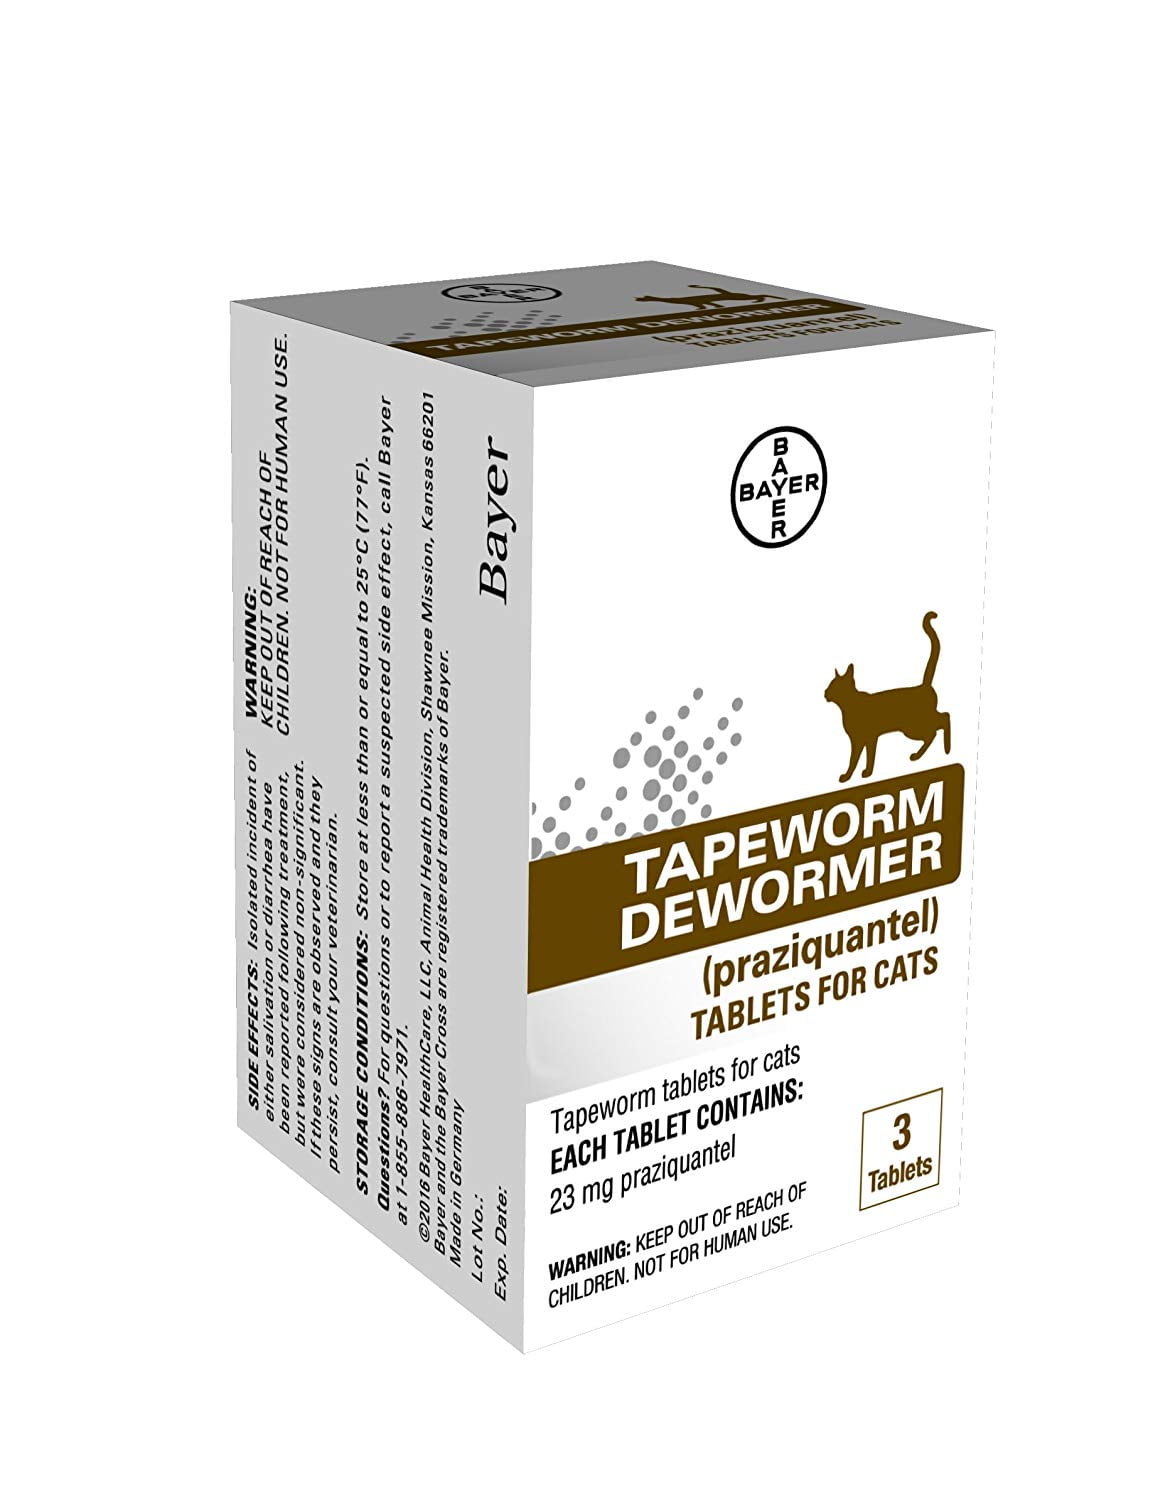 Bayer Tapeworm Dewormer for Cats, 3 